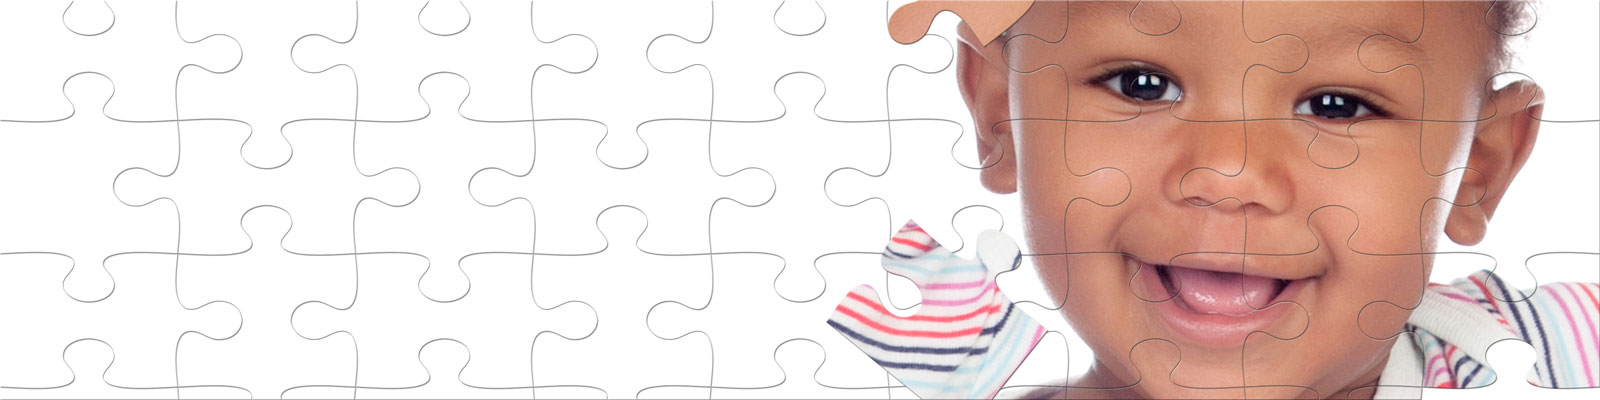 Child Autism Puzzle - ASD - Communicating Above Barriers